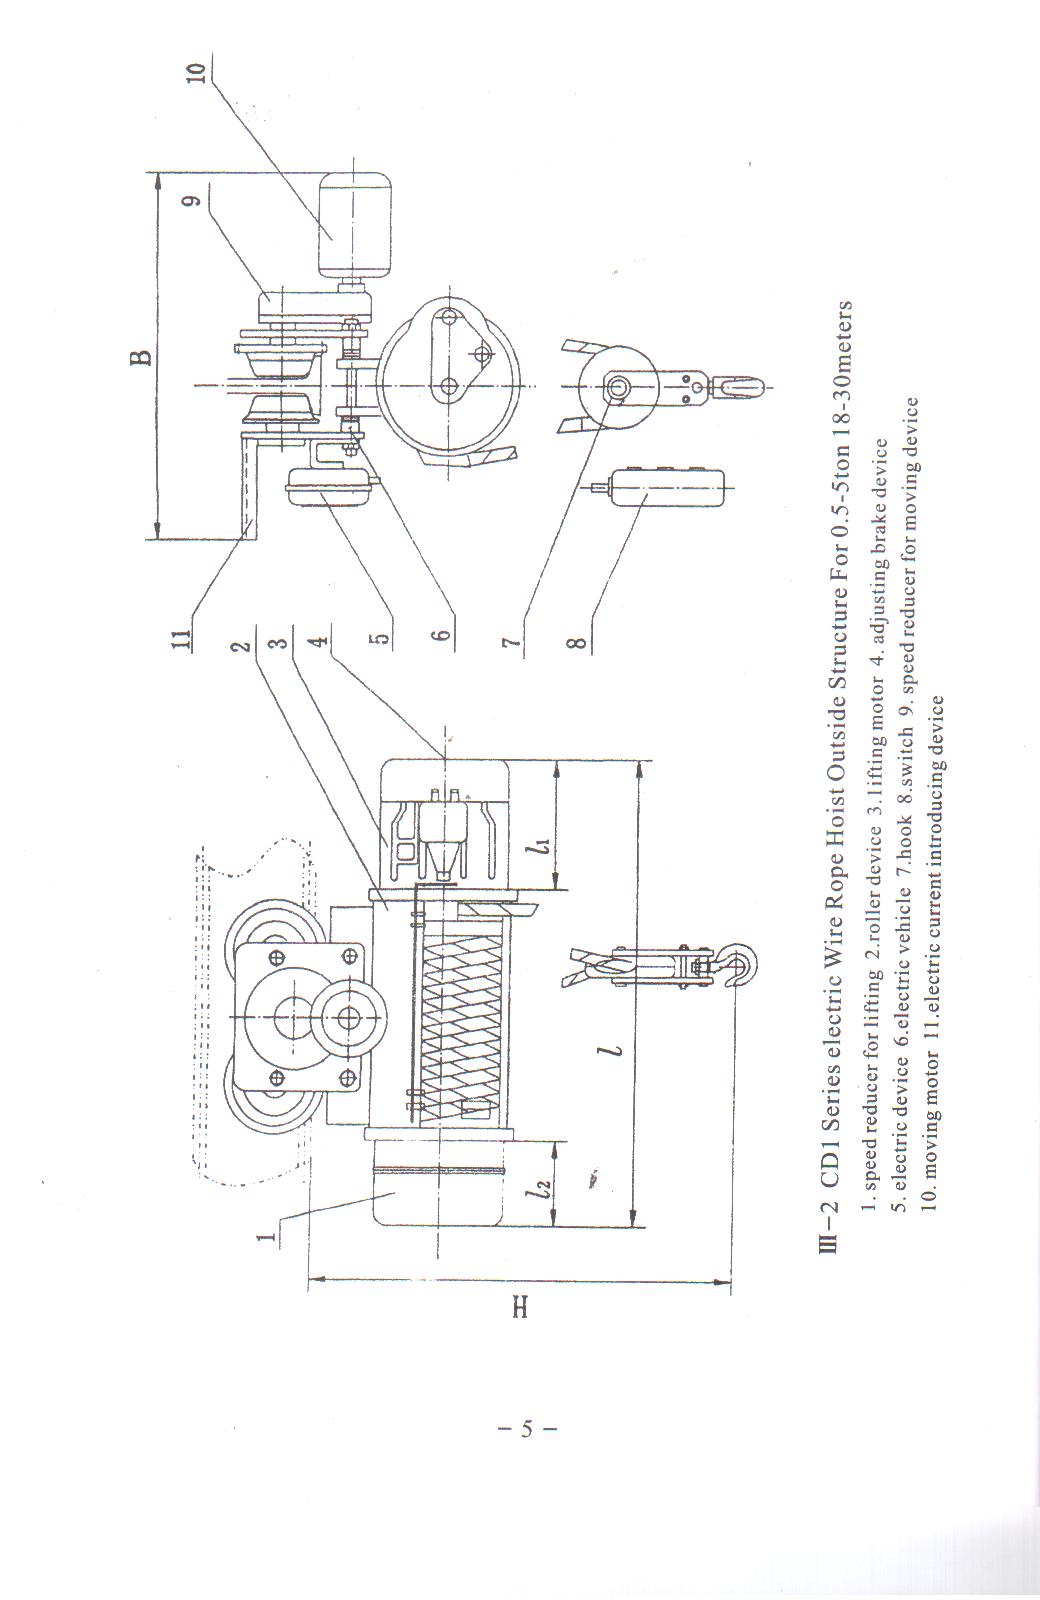 OPERATIONAL MANUAL for the CD1 MD1 Wire Rope Electric Hoist5 011.jpg